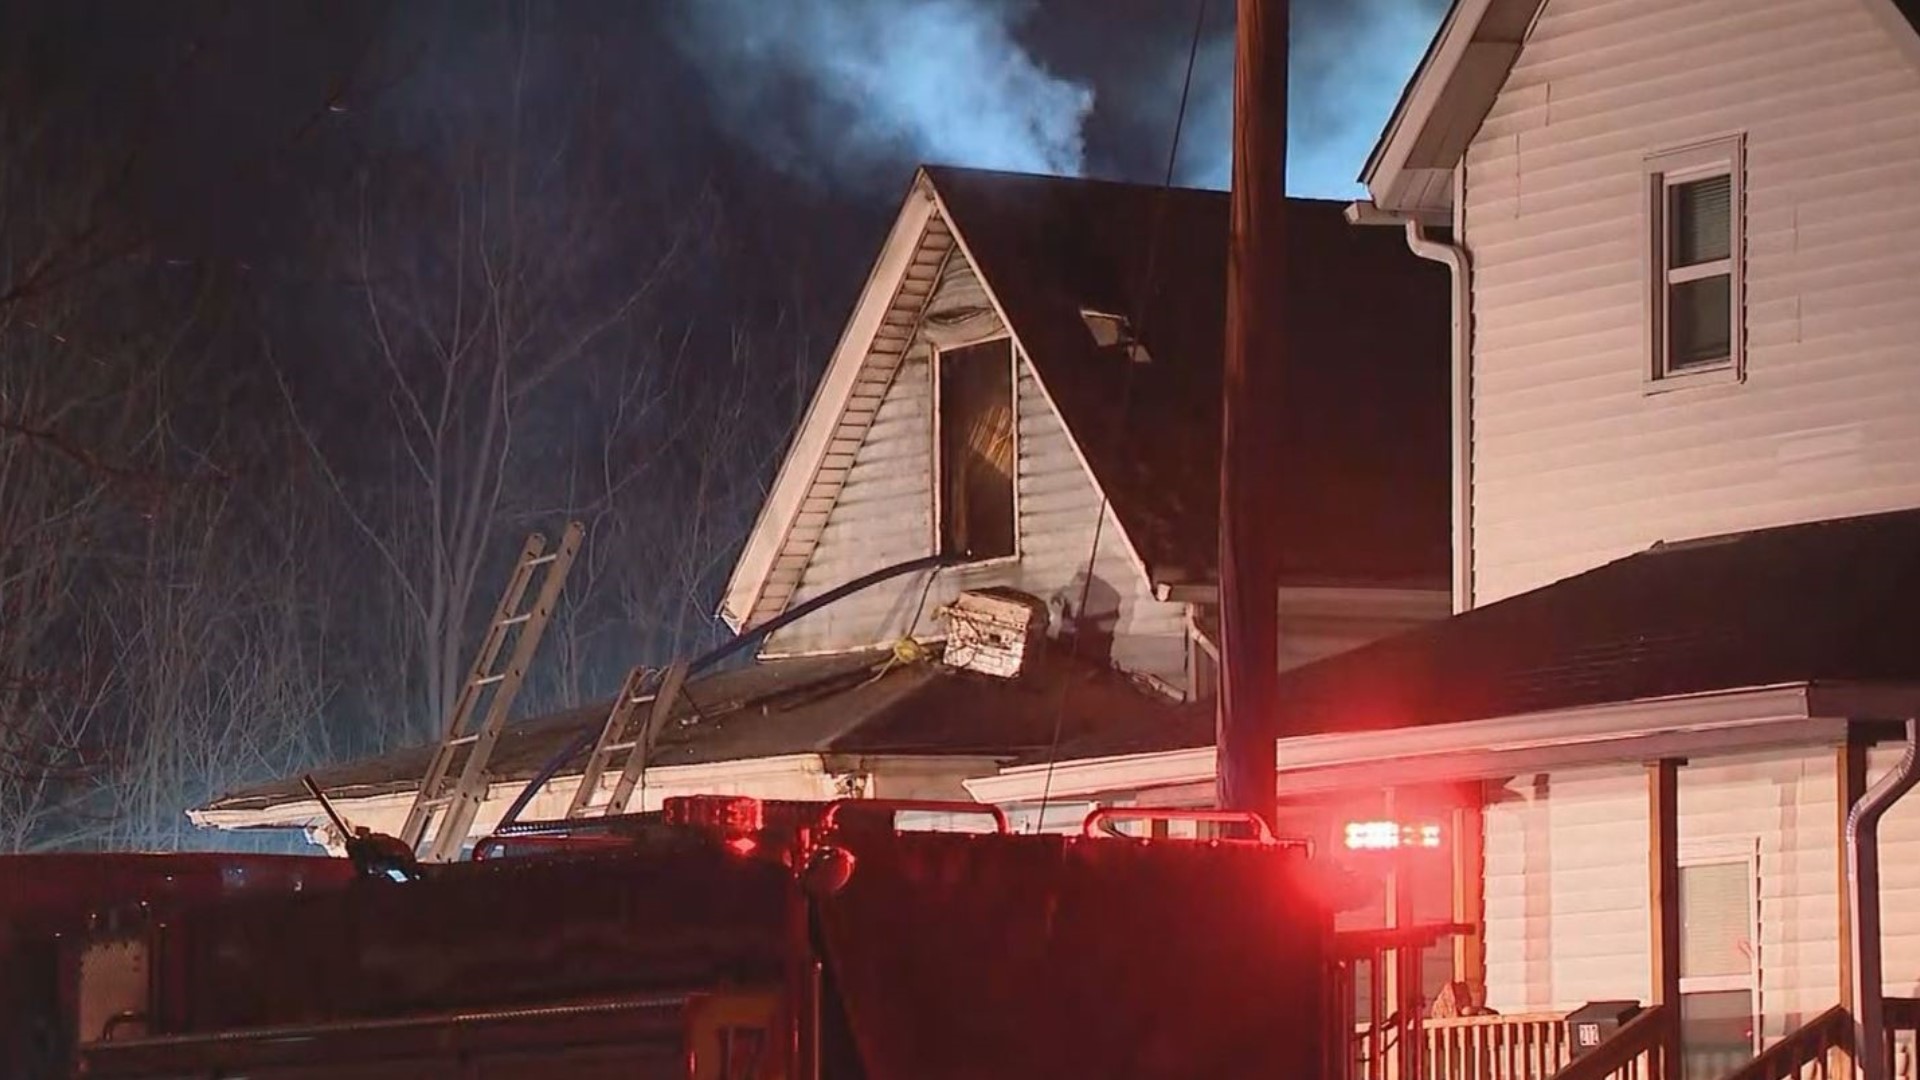 One person was burned while telling dispatchers about a house fire in Franklinton, according to Batallion Chief Steve Martin with the Columbus Division of Fire.